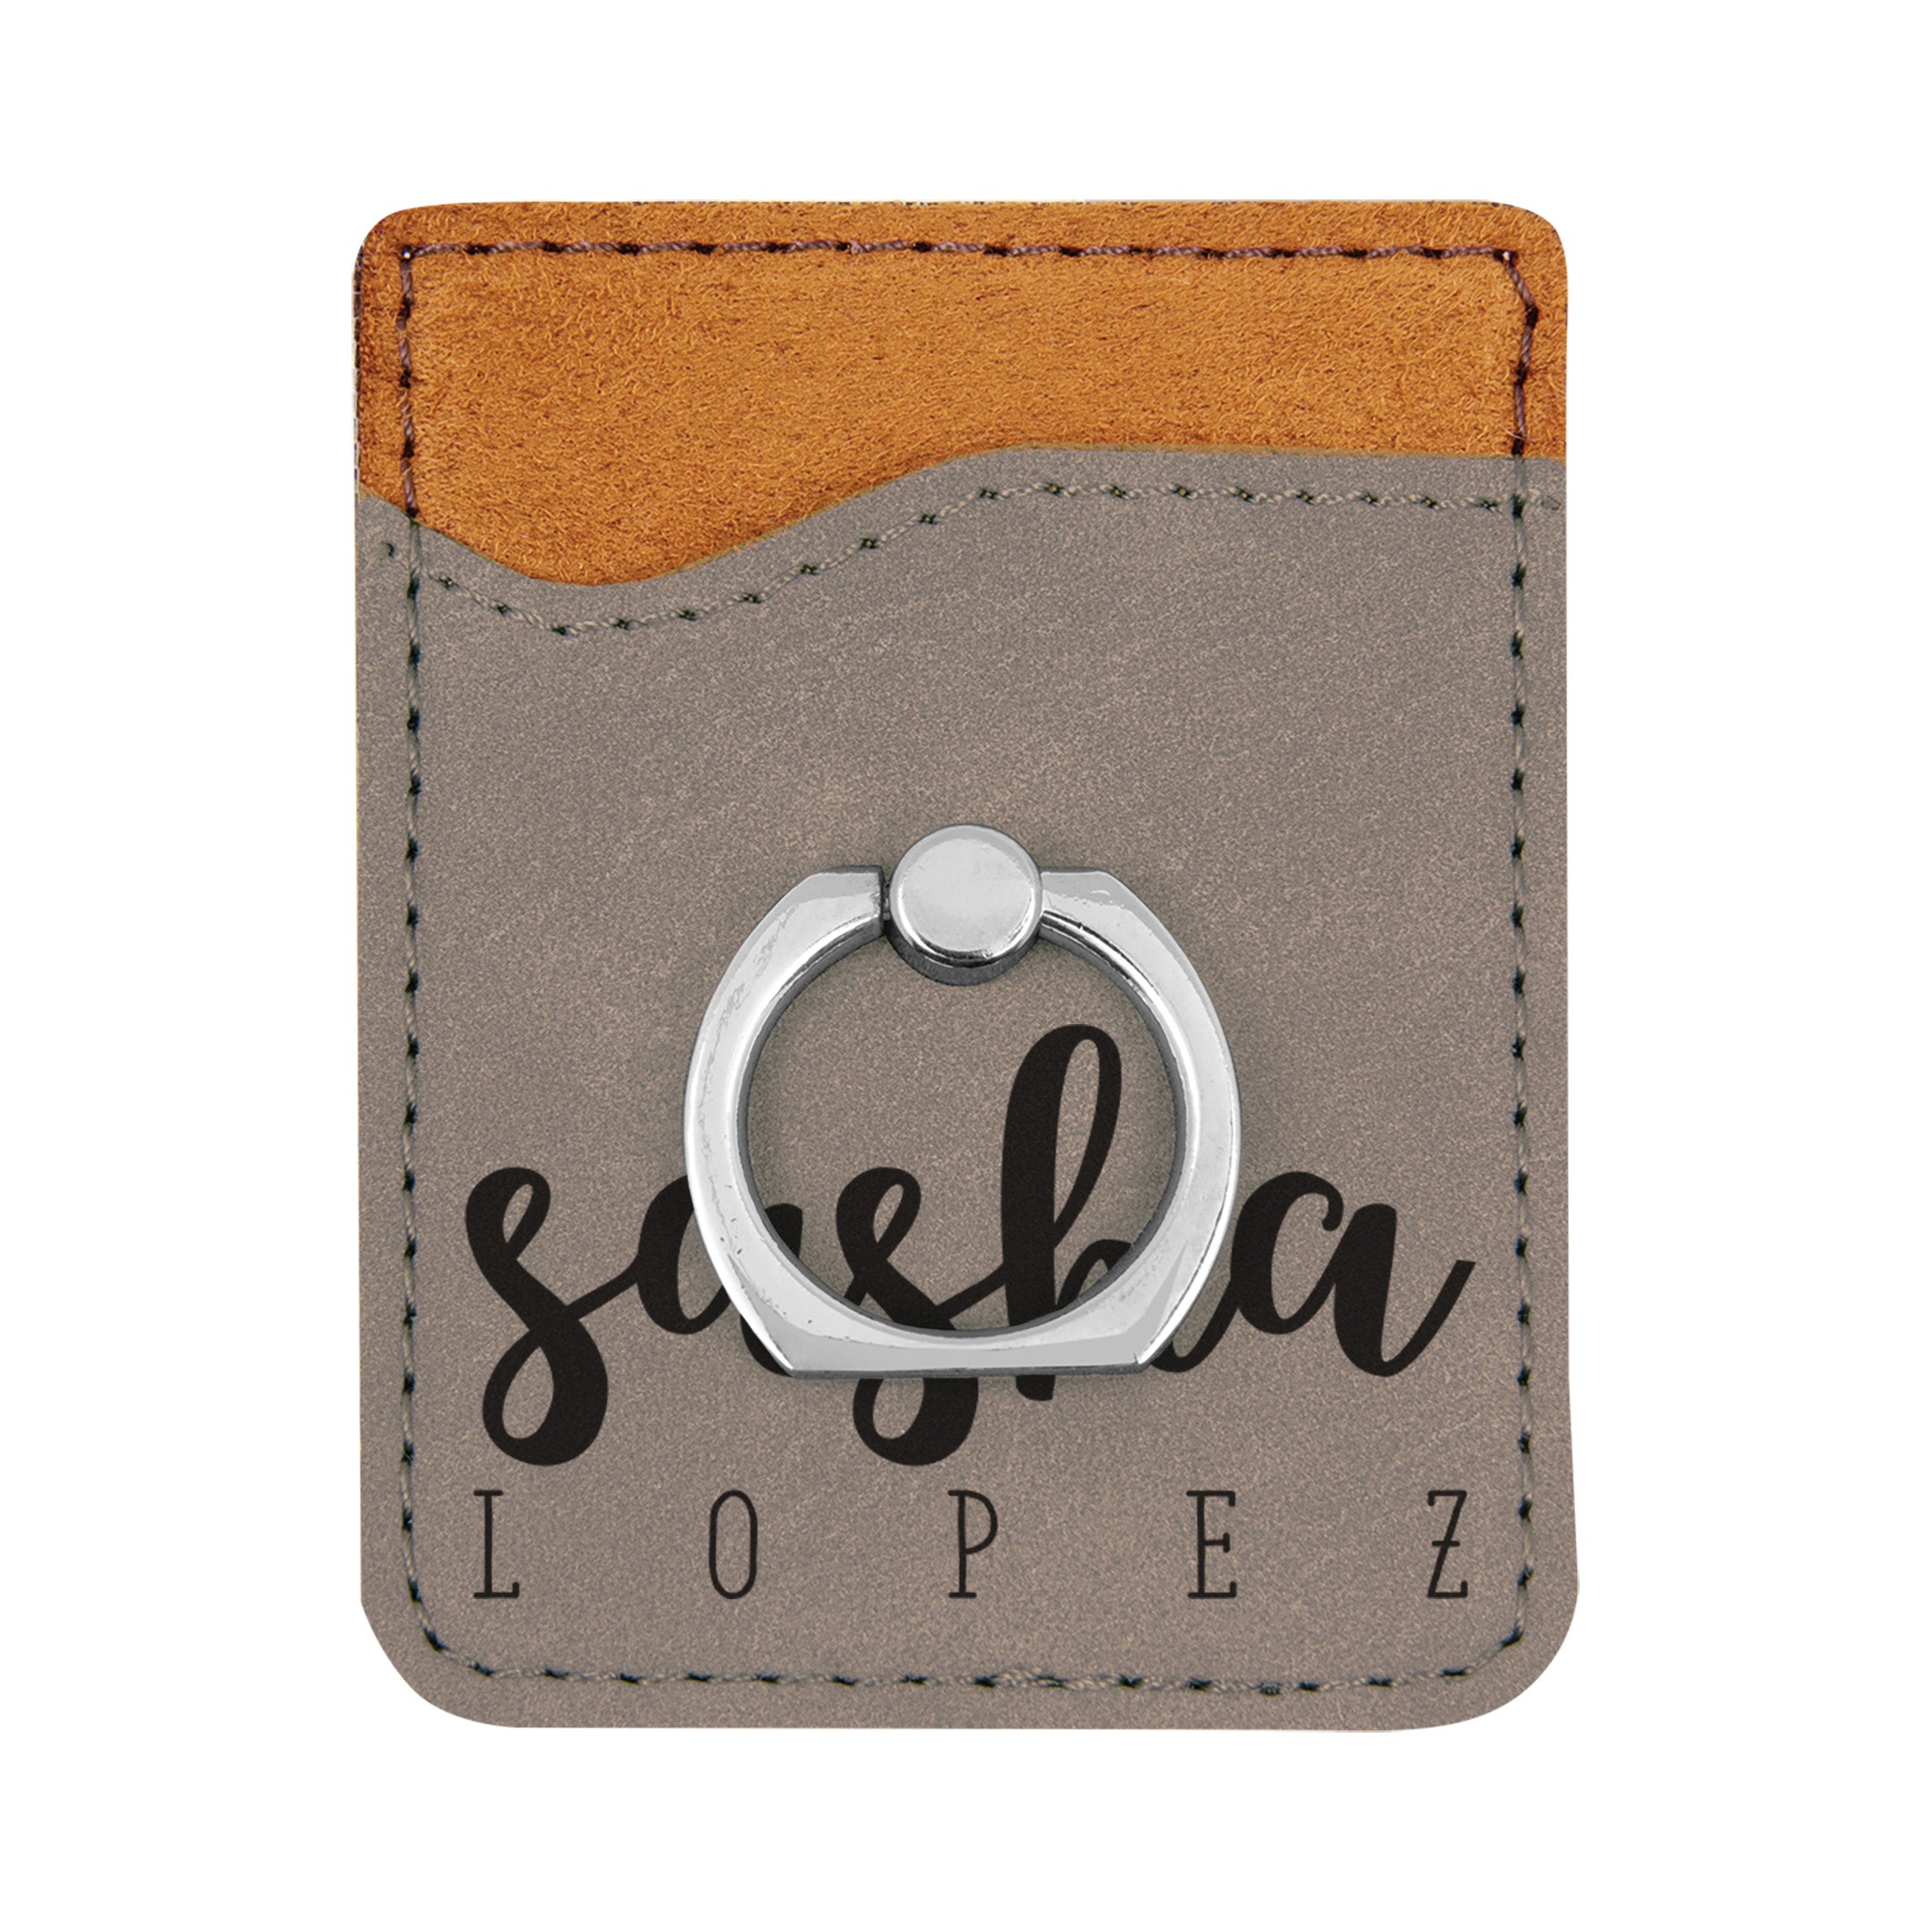 Personalized Leather Wallet - Engraved Leather Wallet Initial/Name